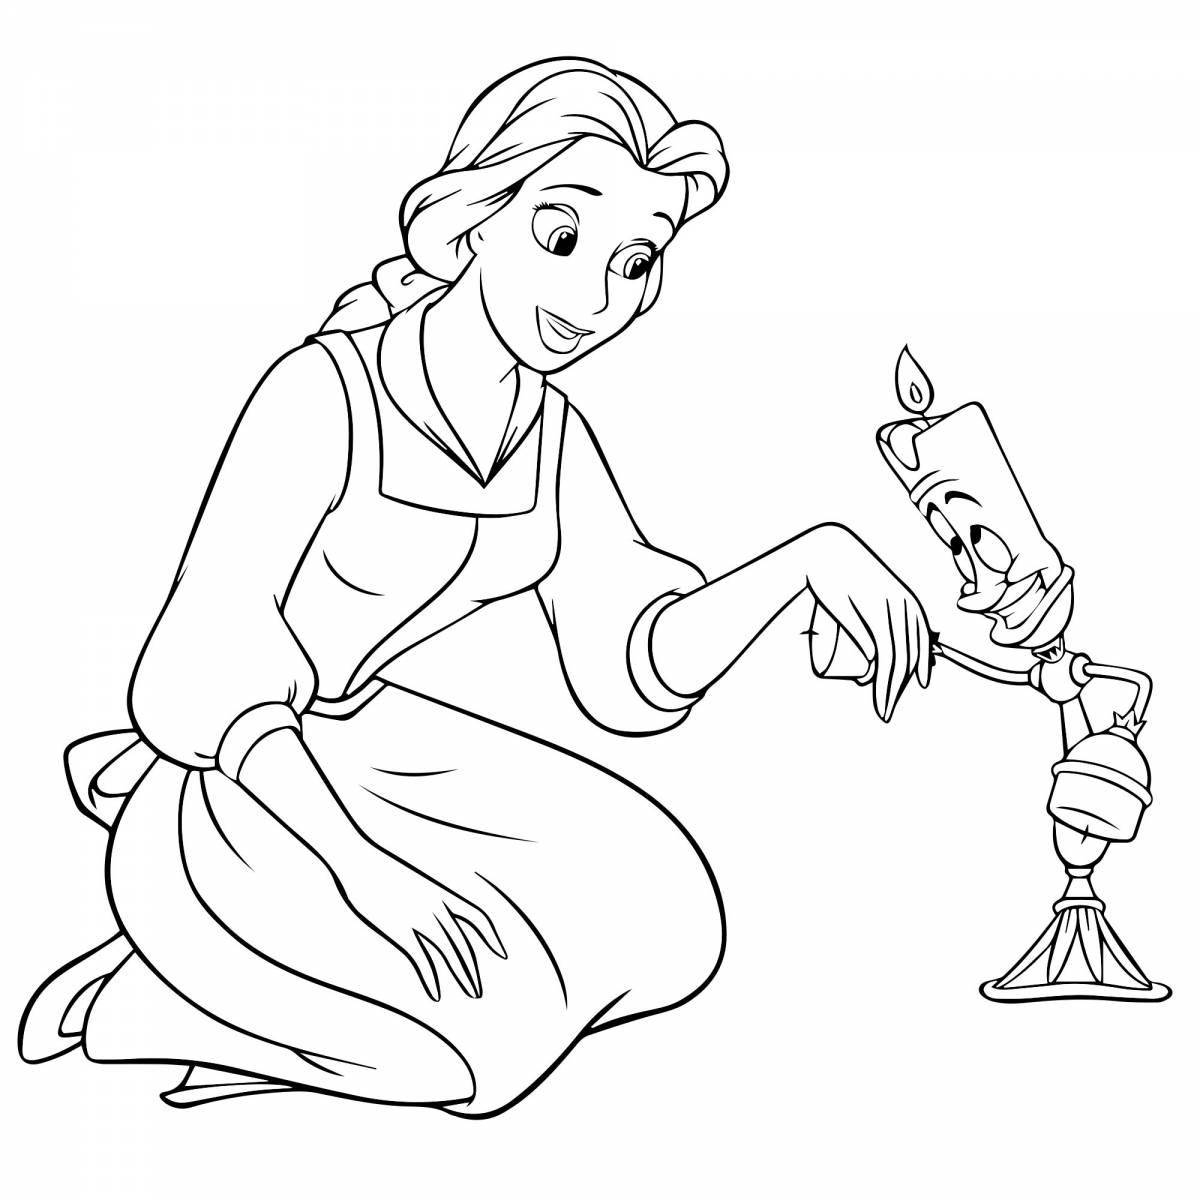 Cute beauty and the beast coloring pages for kids